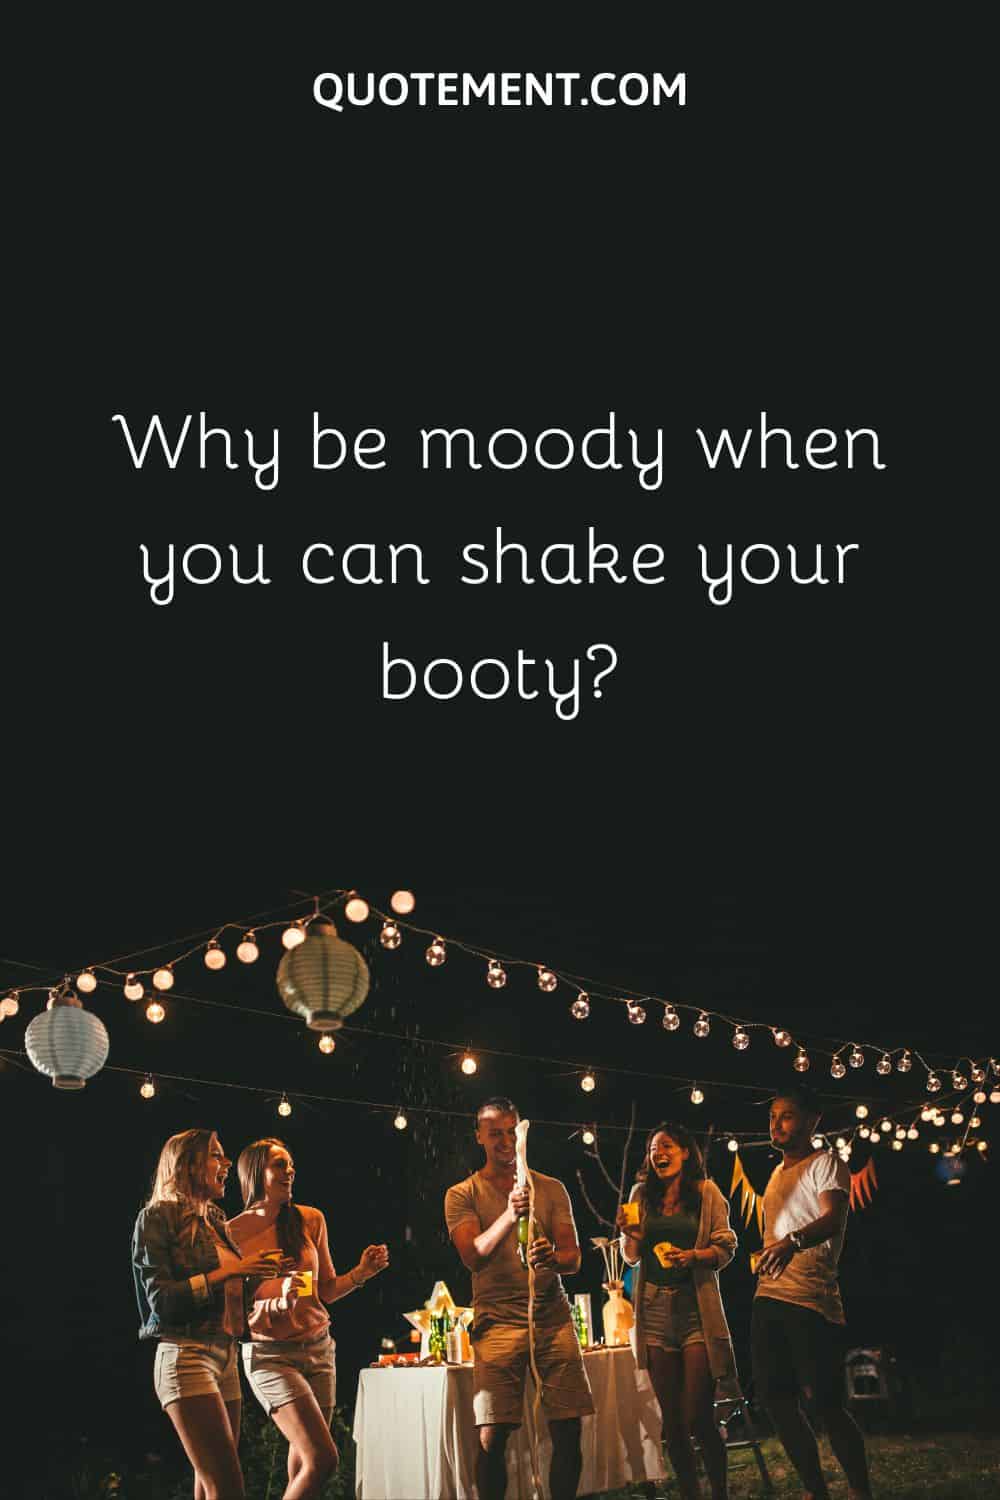 Why be moody when you can shake your booty